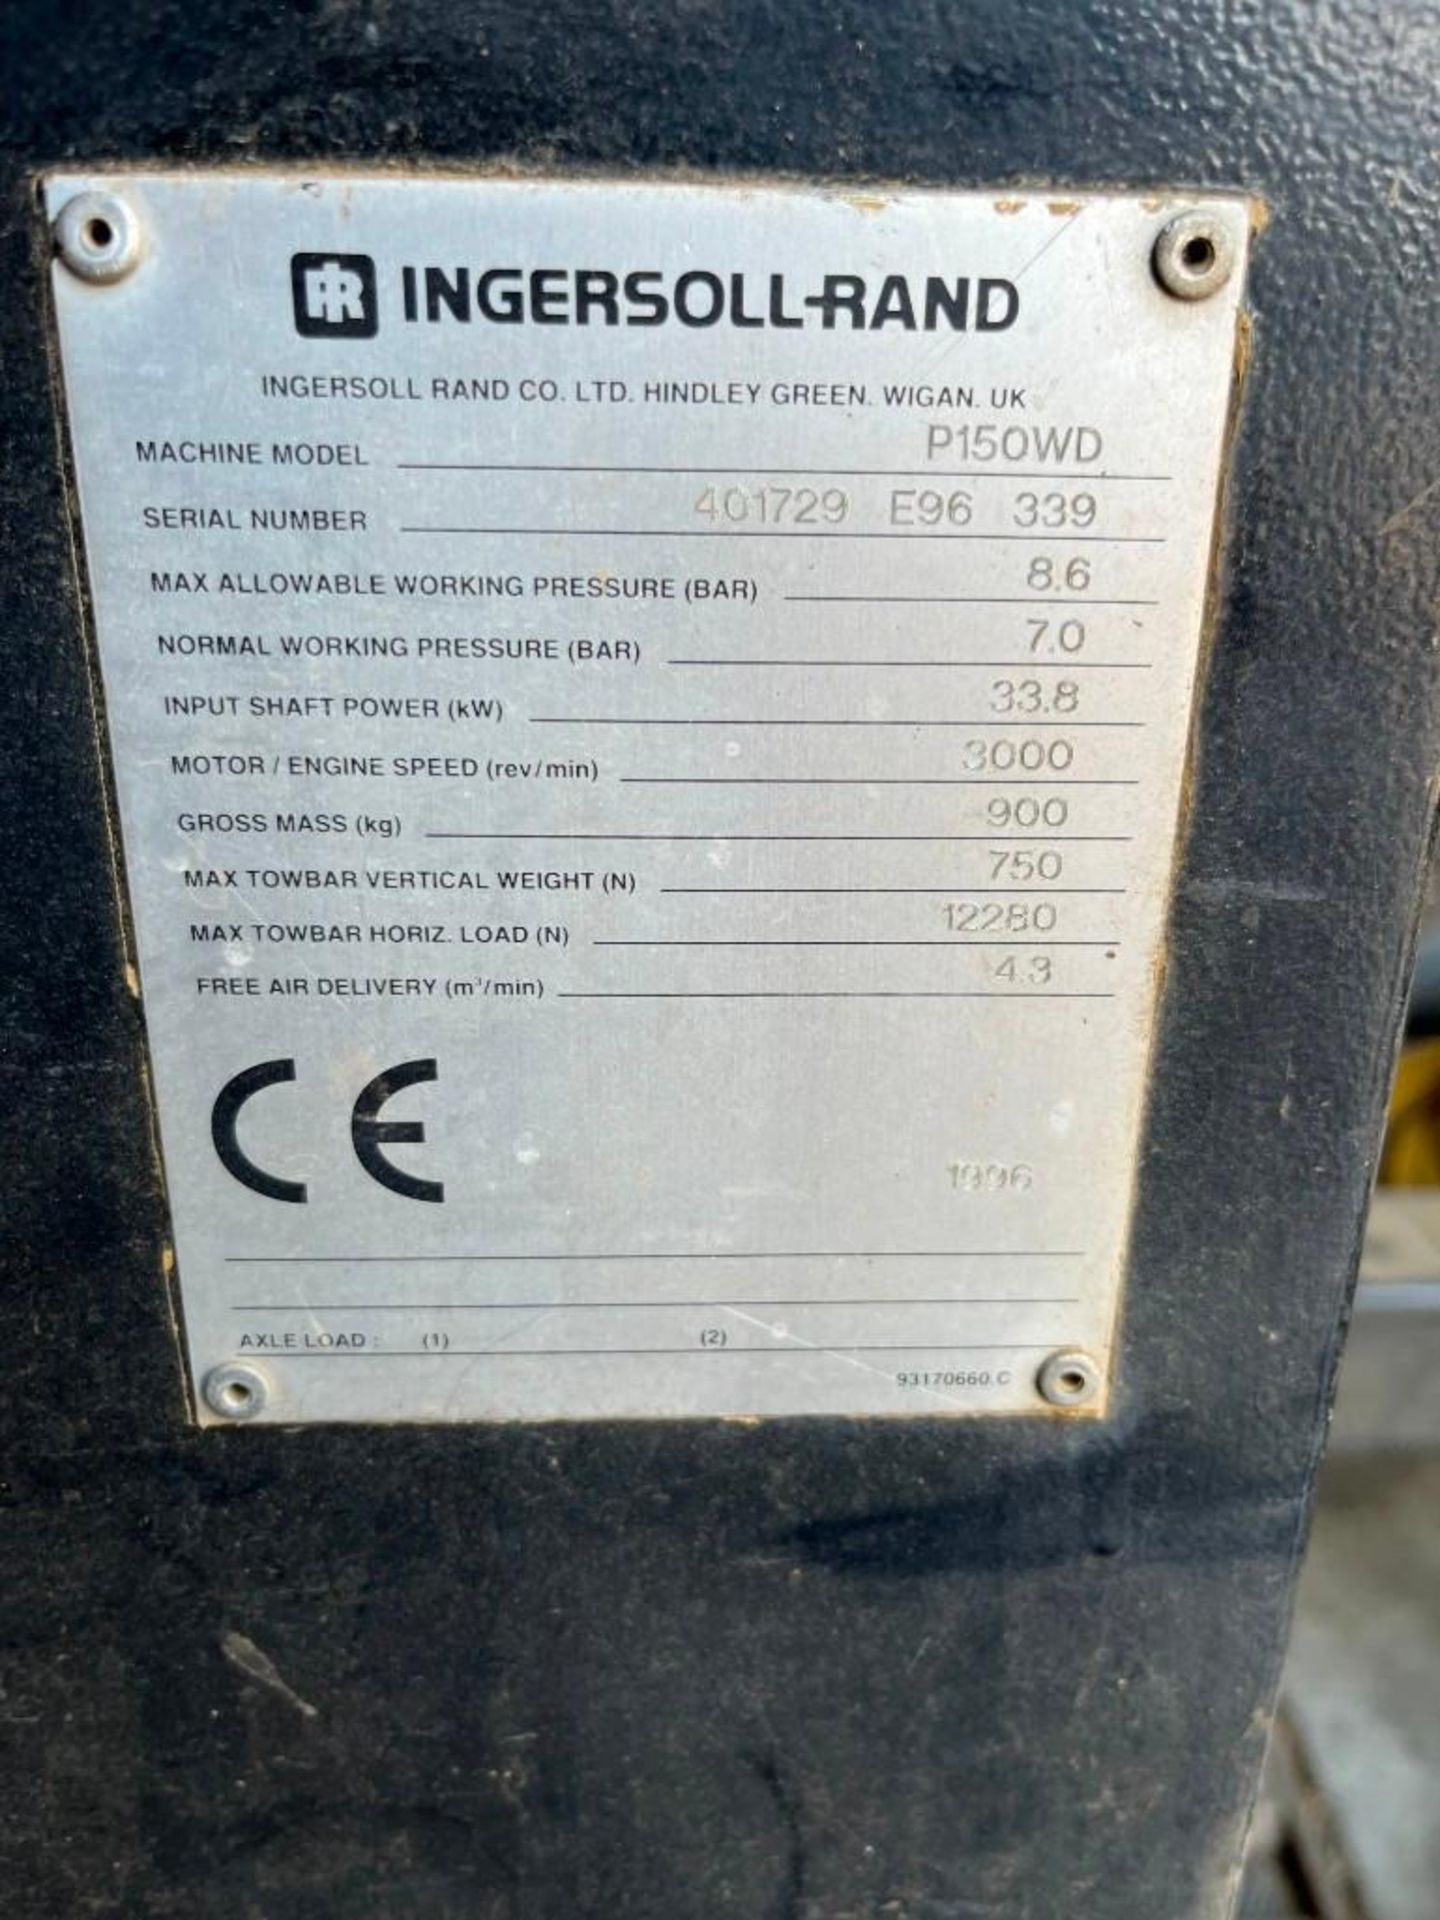 Ingersol Rand P150WD Towable Air Compressor - Image 4 of 4